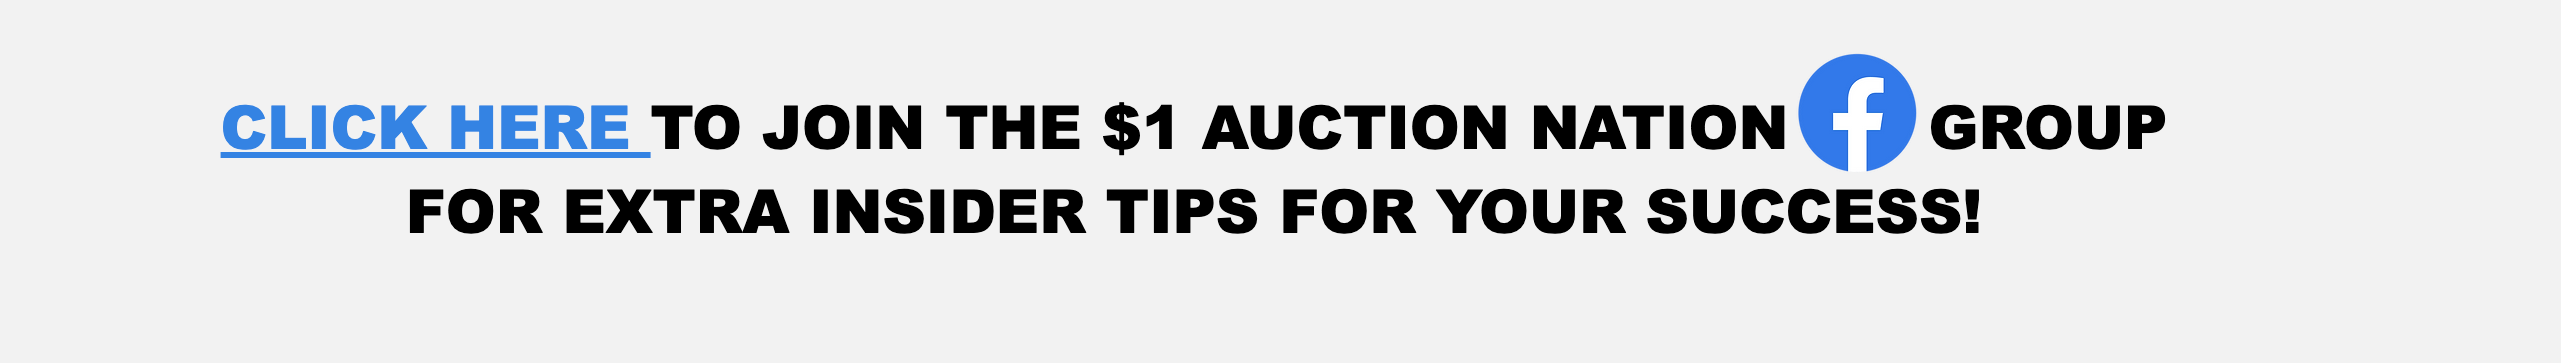 Join the $1 Auction Nation Facebook Group